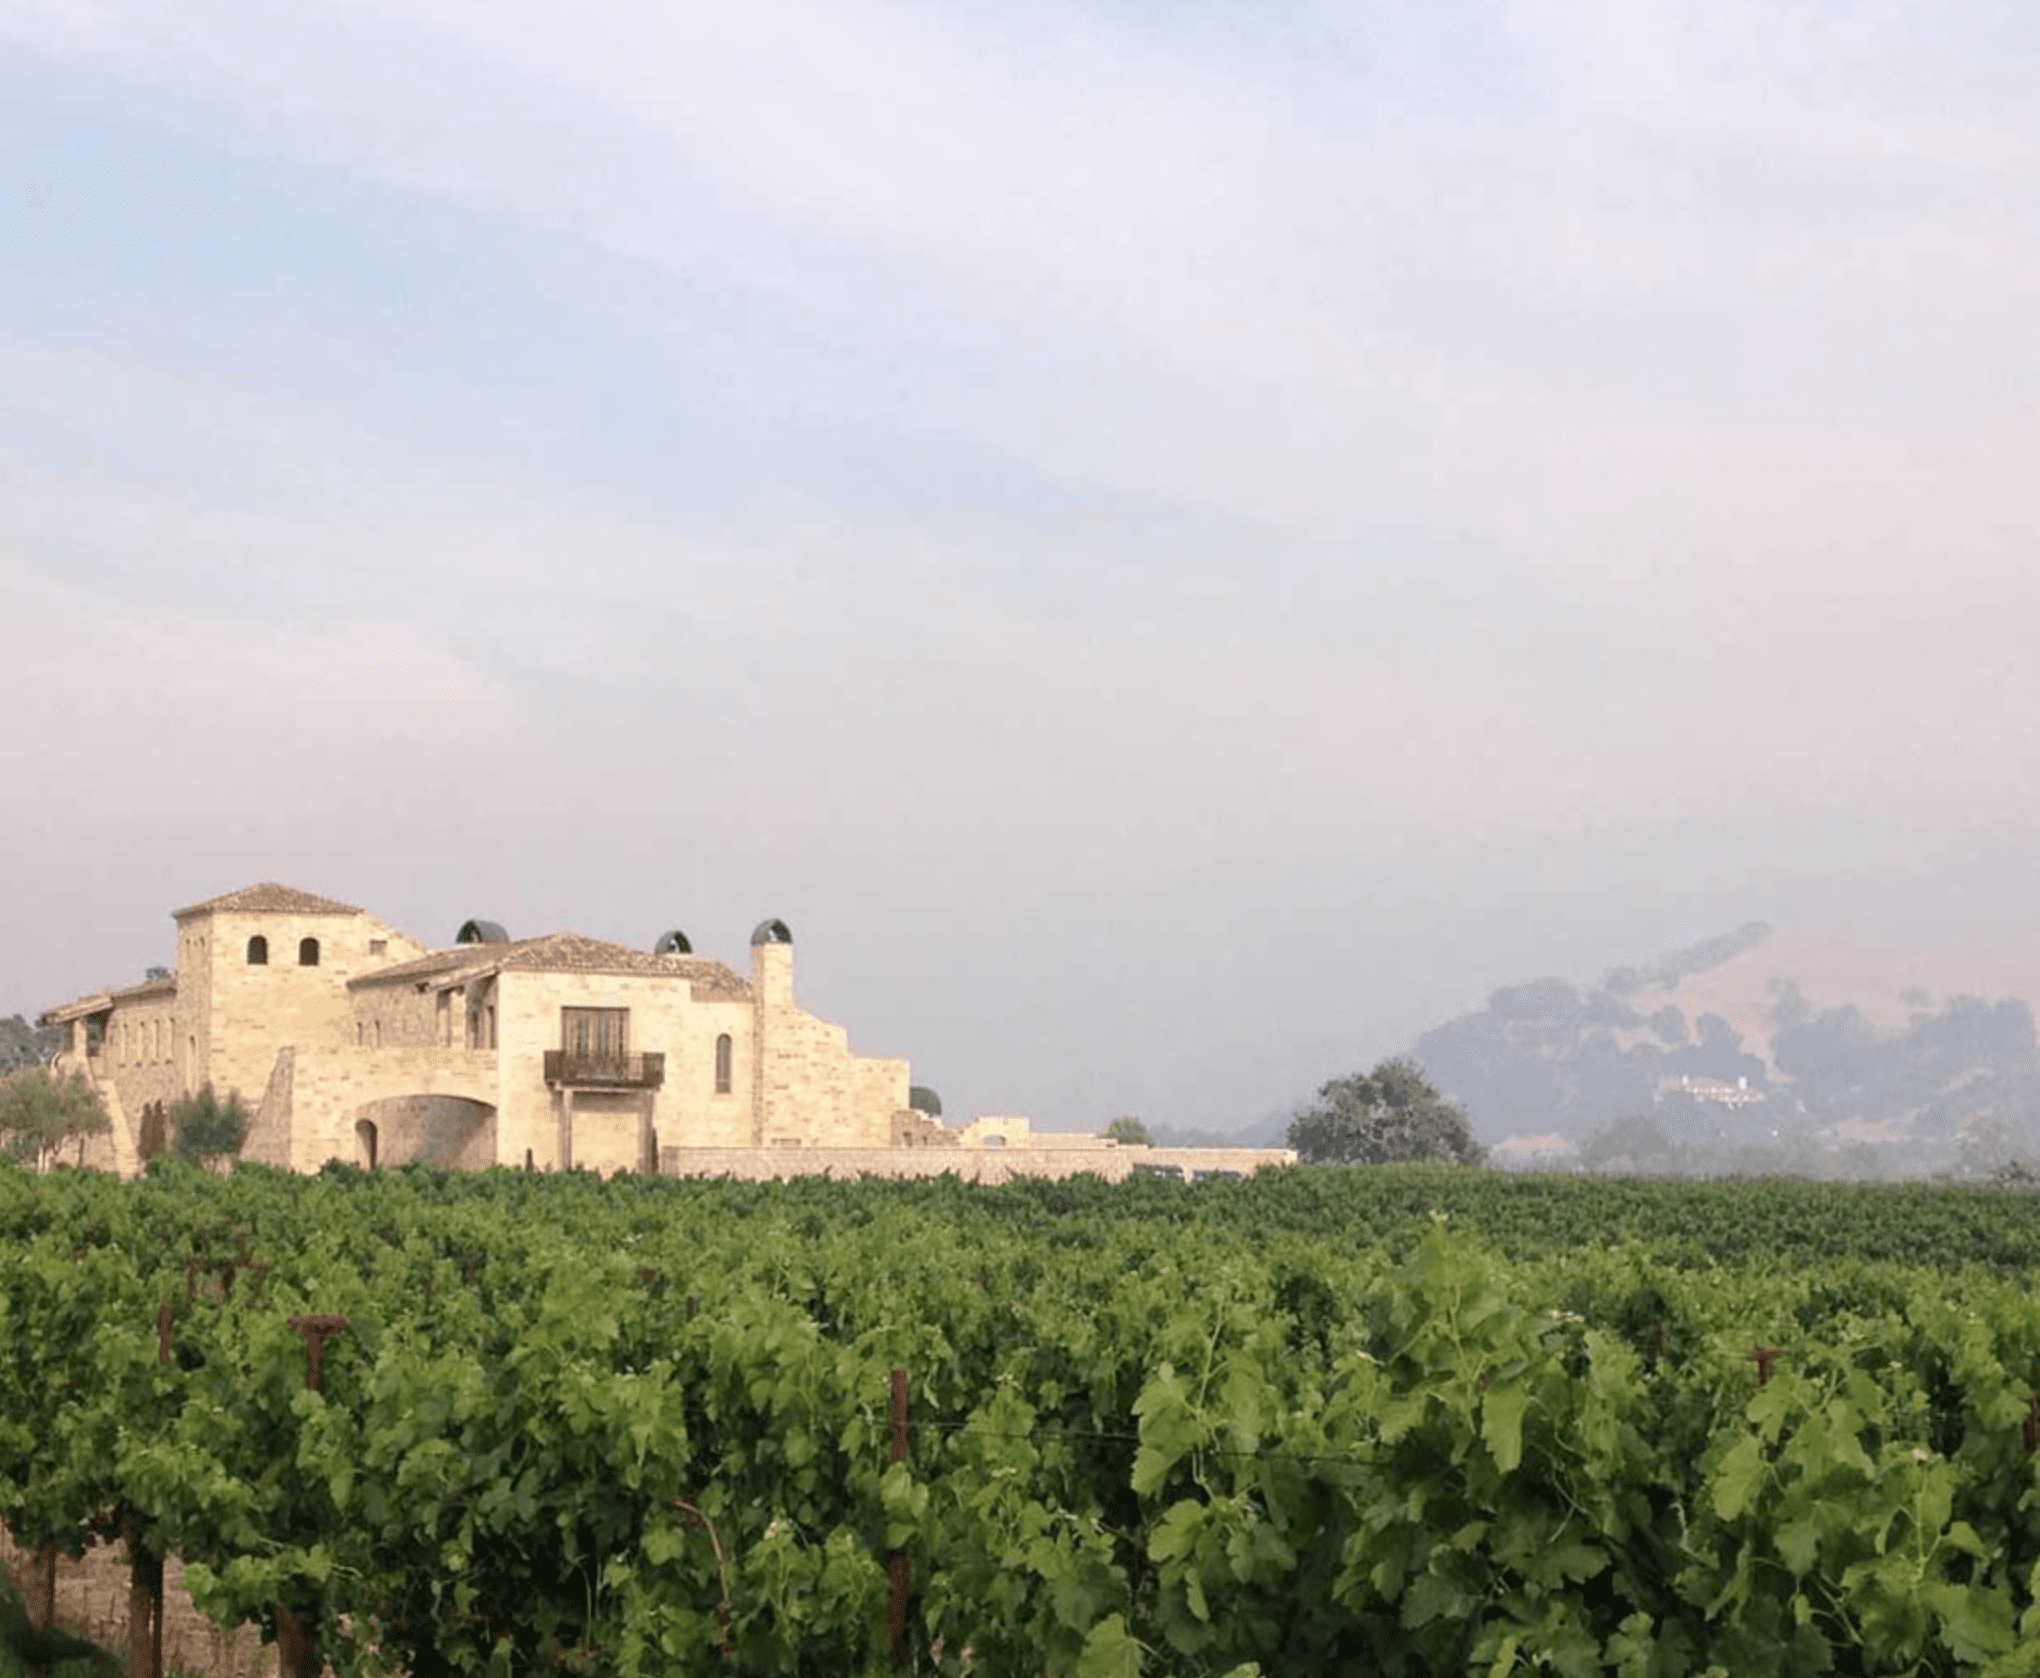 Sunstone Winery announces leadership changes